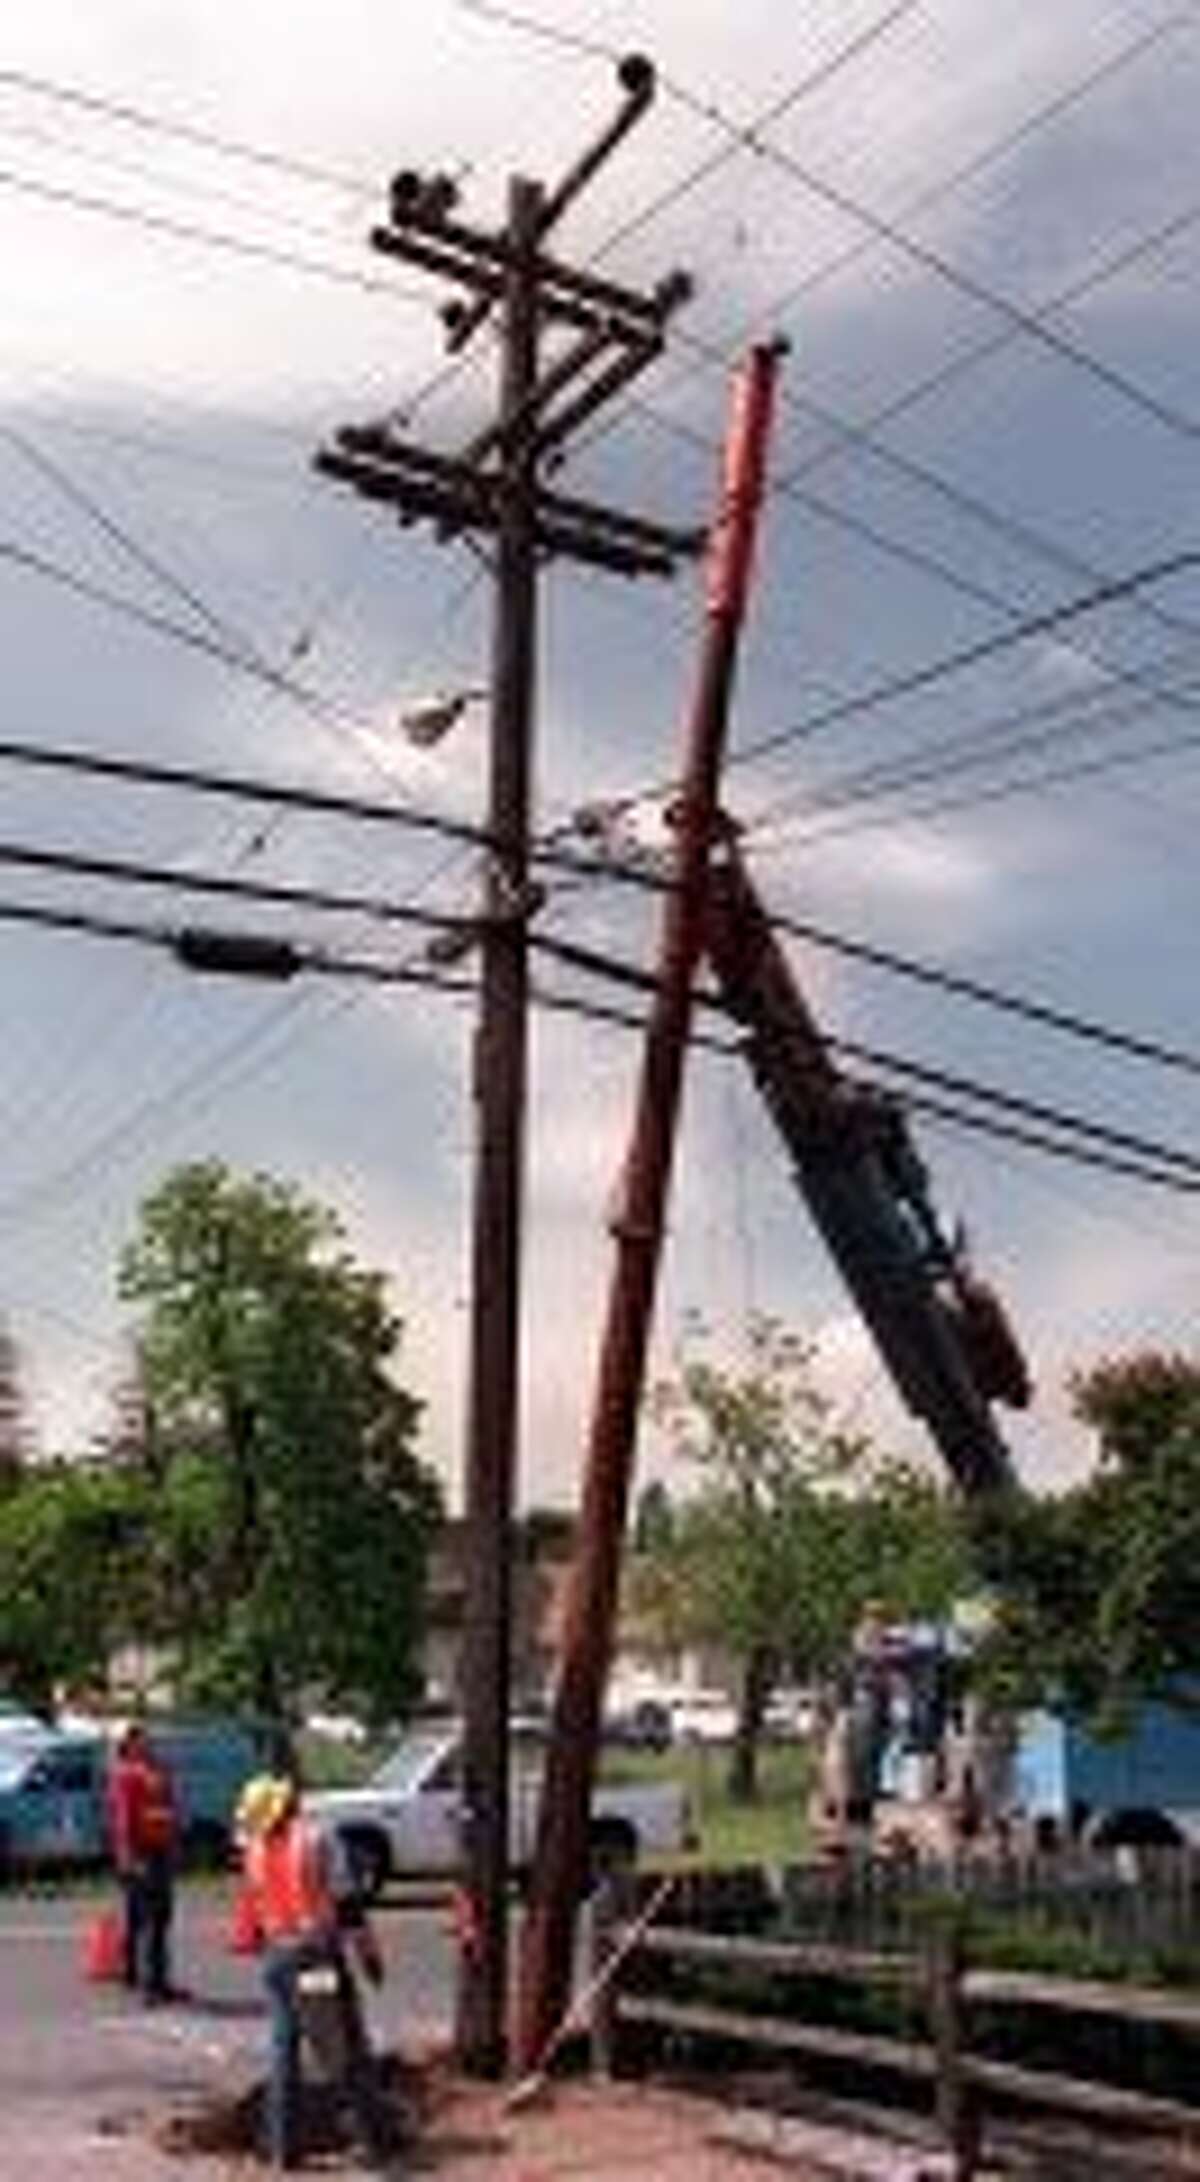 POLES/C/04MAY95/BU/JLTelfer PG&E line workers Doug Bock and Jeff Rachel keep tabs on the alignment as boom operator John Sobelman finesses a replacement power pole into place among the active power and phone lines on a damaged power pole. PG&E is doing a statewide program to upgrade its $3 billion worth of power poles. � Imola and Wilkins - Napa, CA